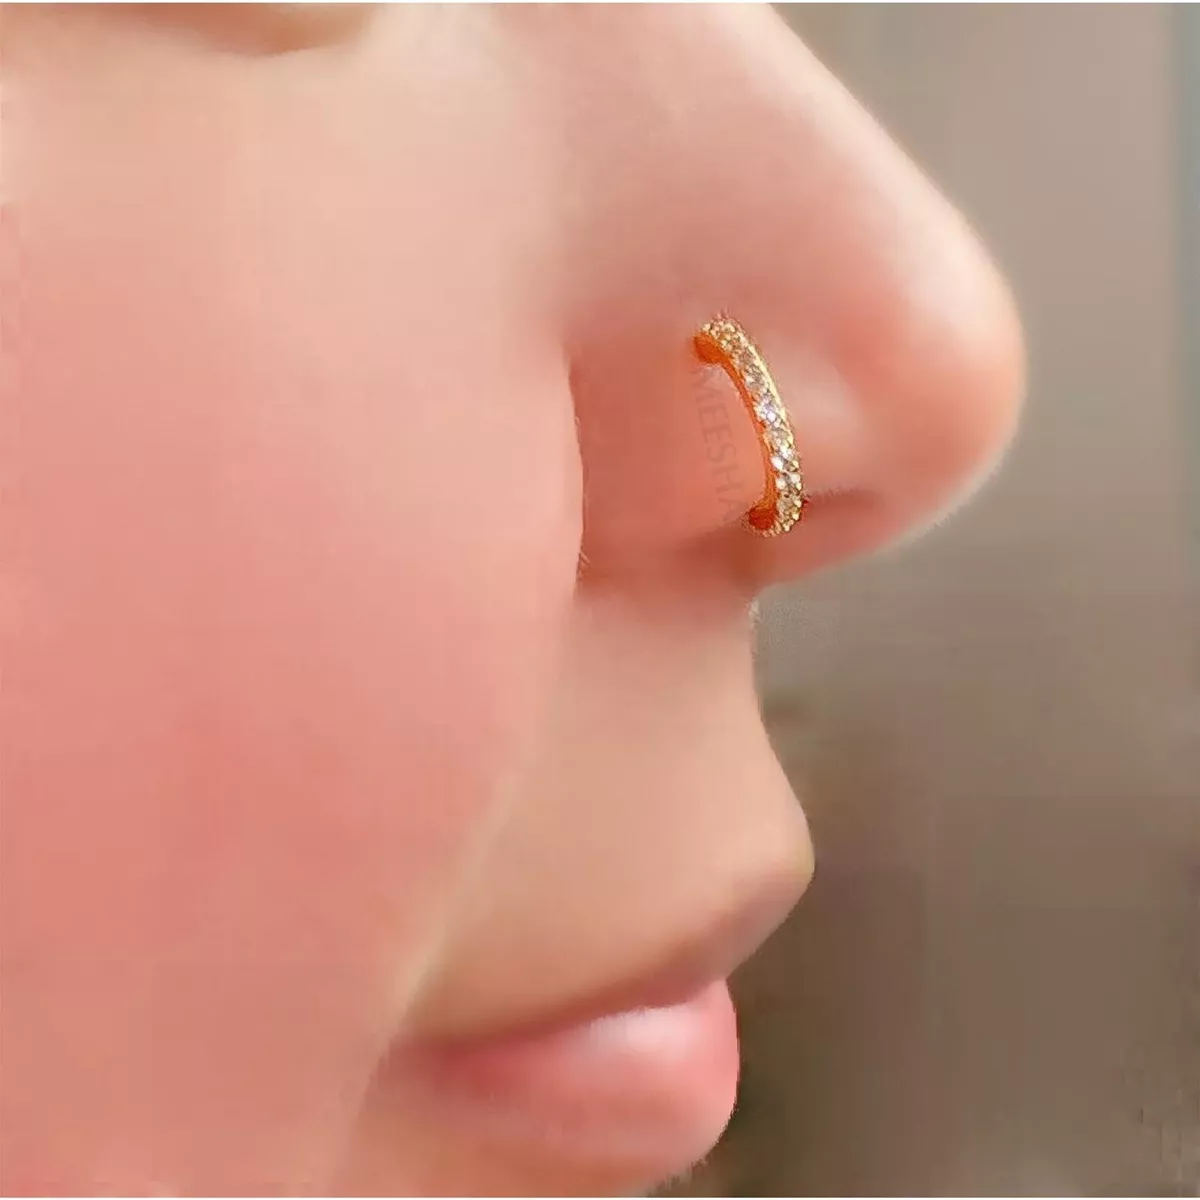 New 4 Diamond Nose Ring, Factory Direct Selling European And American  Personality Nose Studs, Ear Studs, Piercing Jewelry NEW - Walmart.com